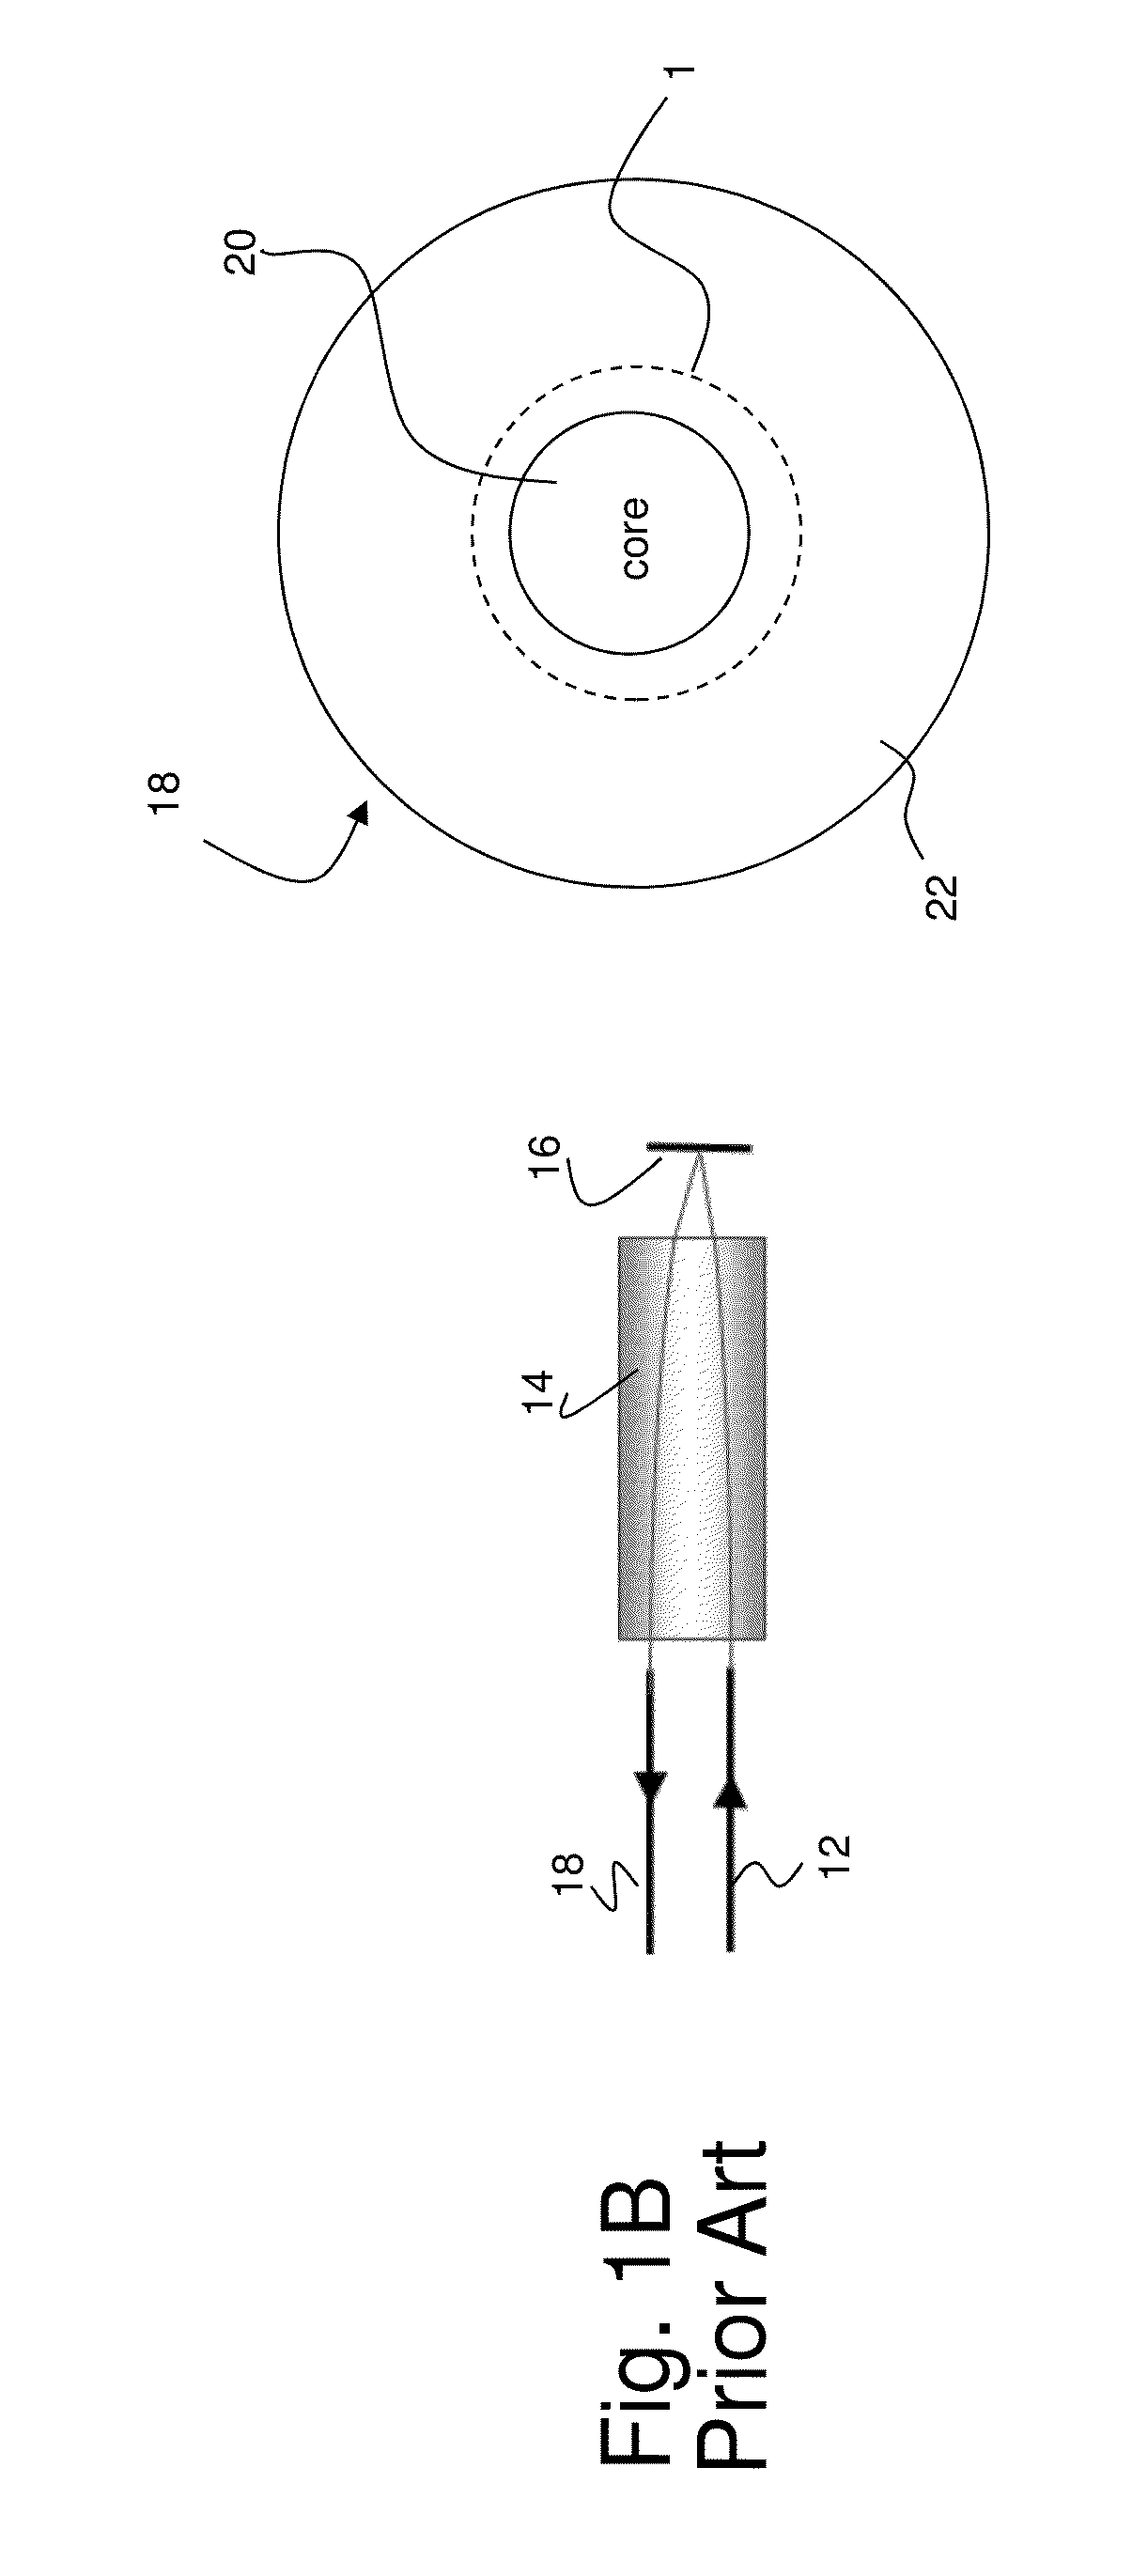 Small form factor variable optical attenuator with cladding mode suppressing fiber